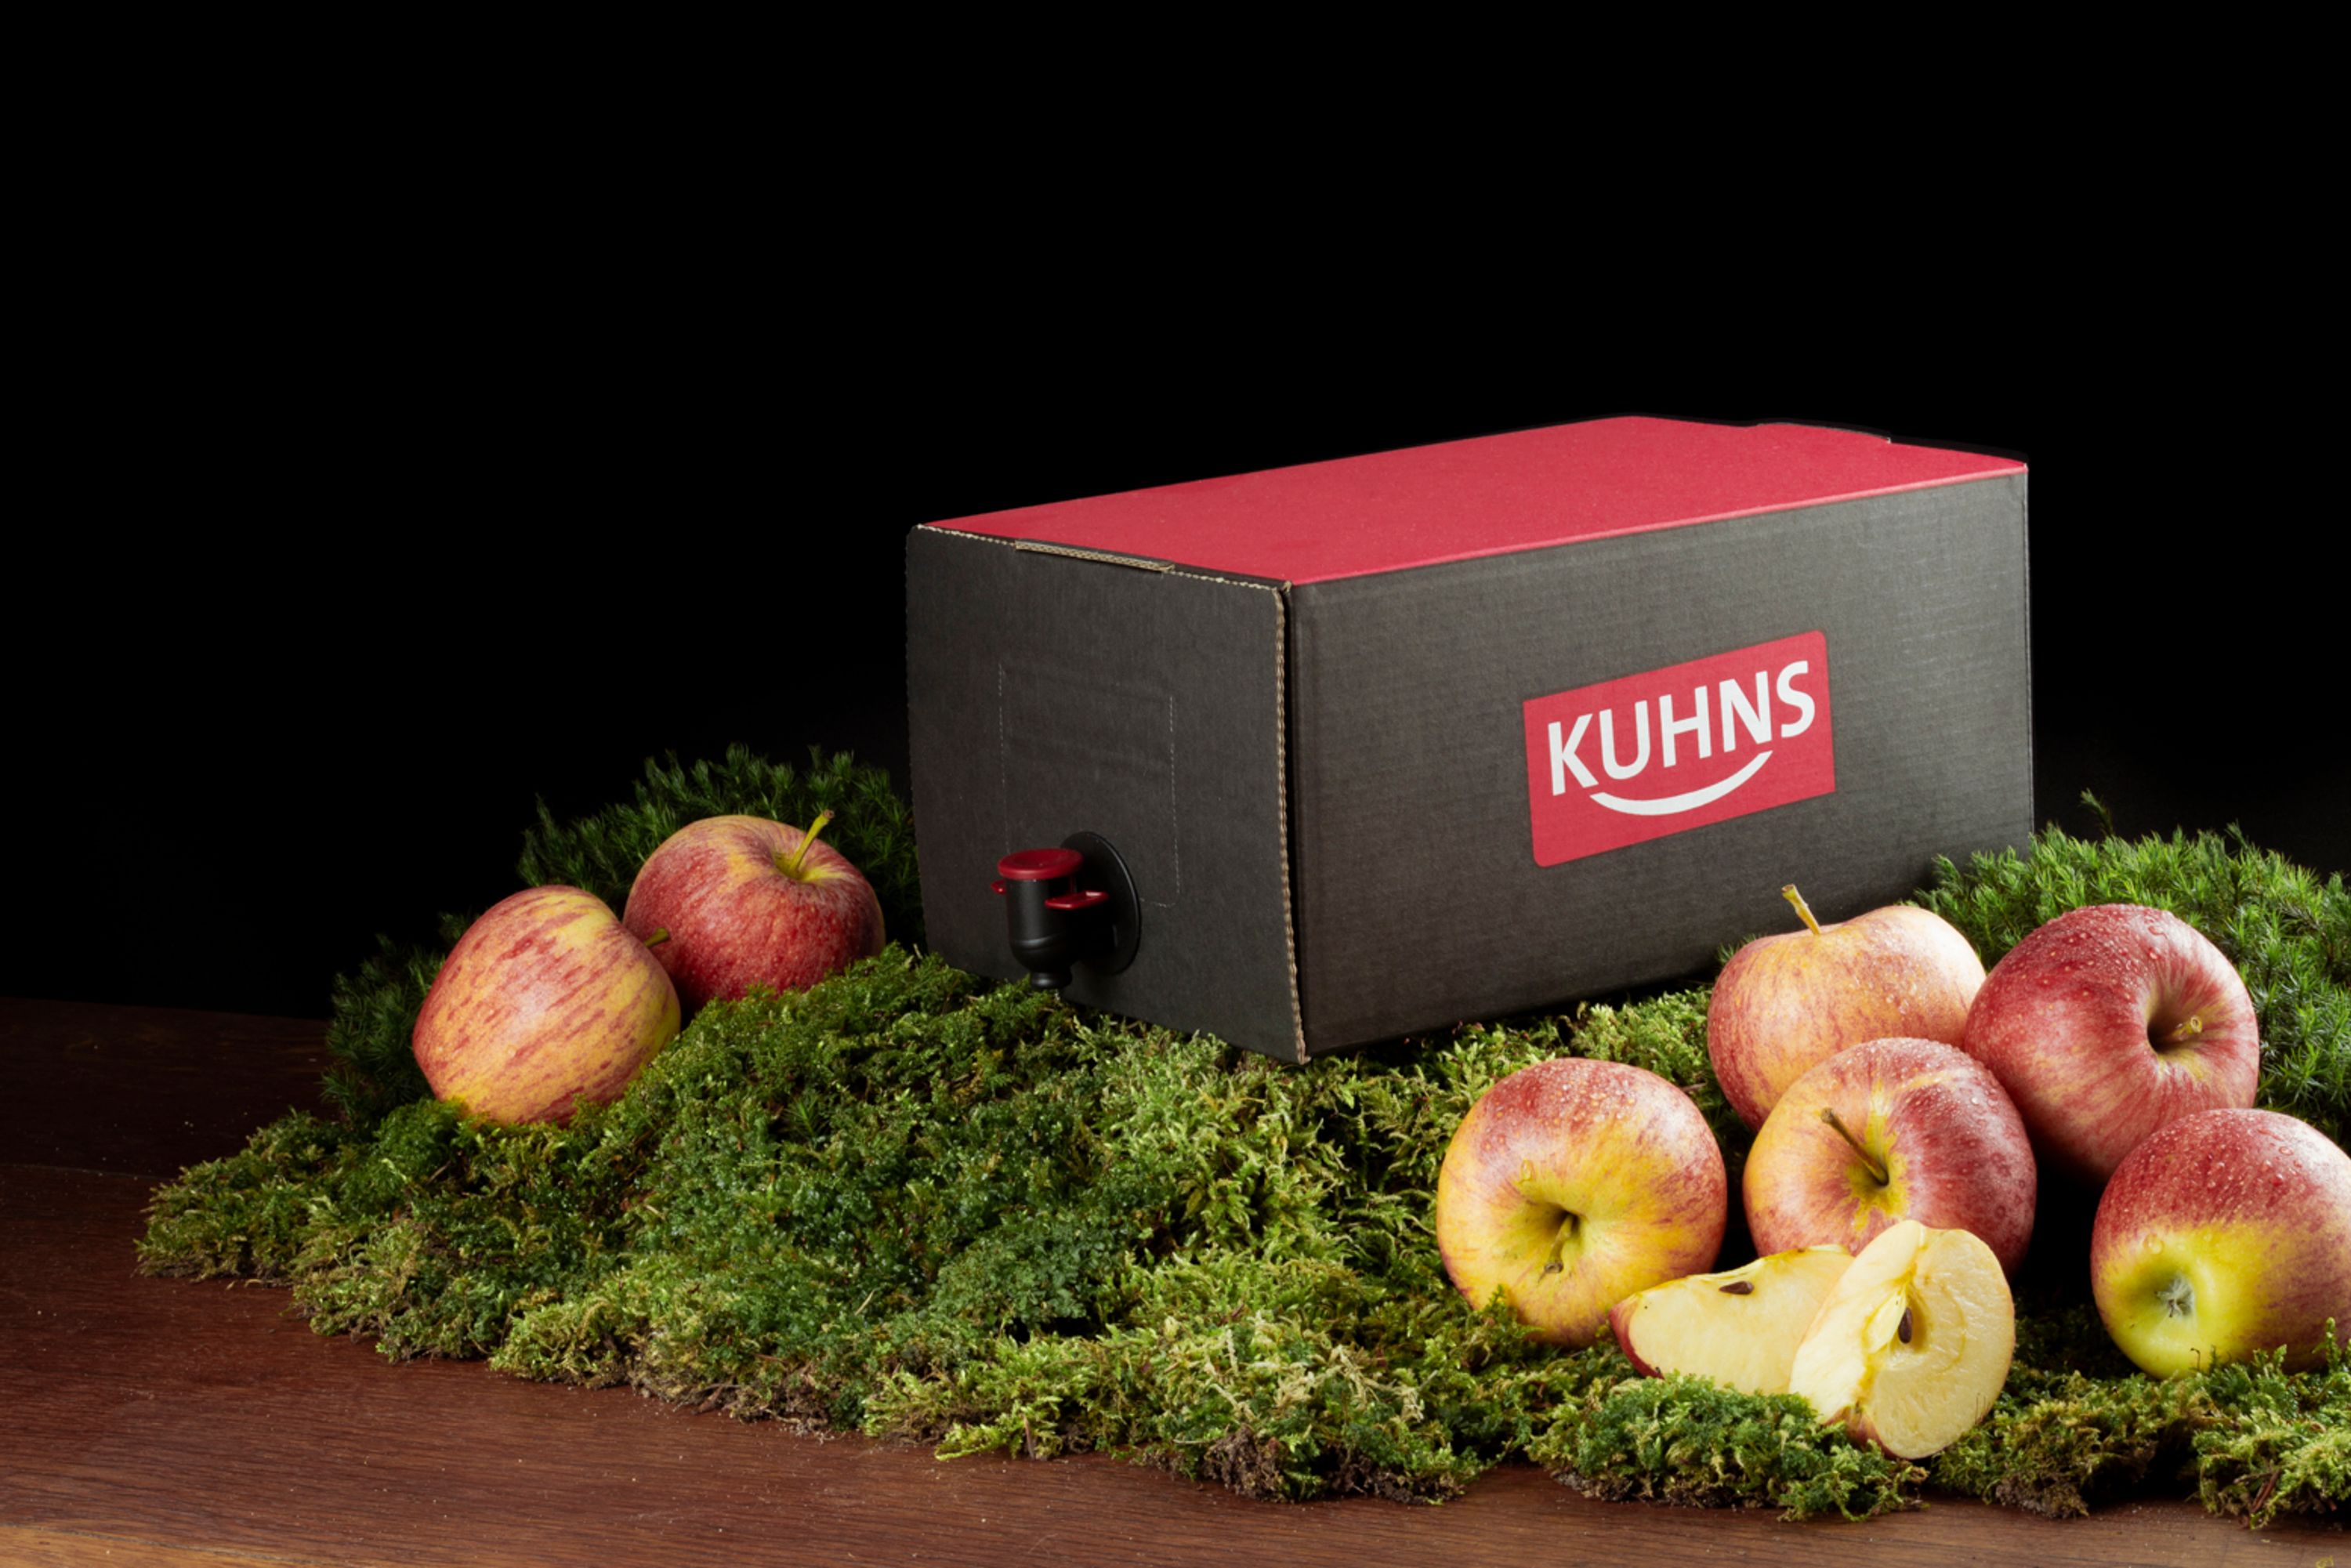 Kuhns cider bag in box 5.0l, alc. 6.0% by volume